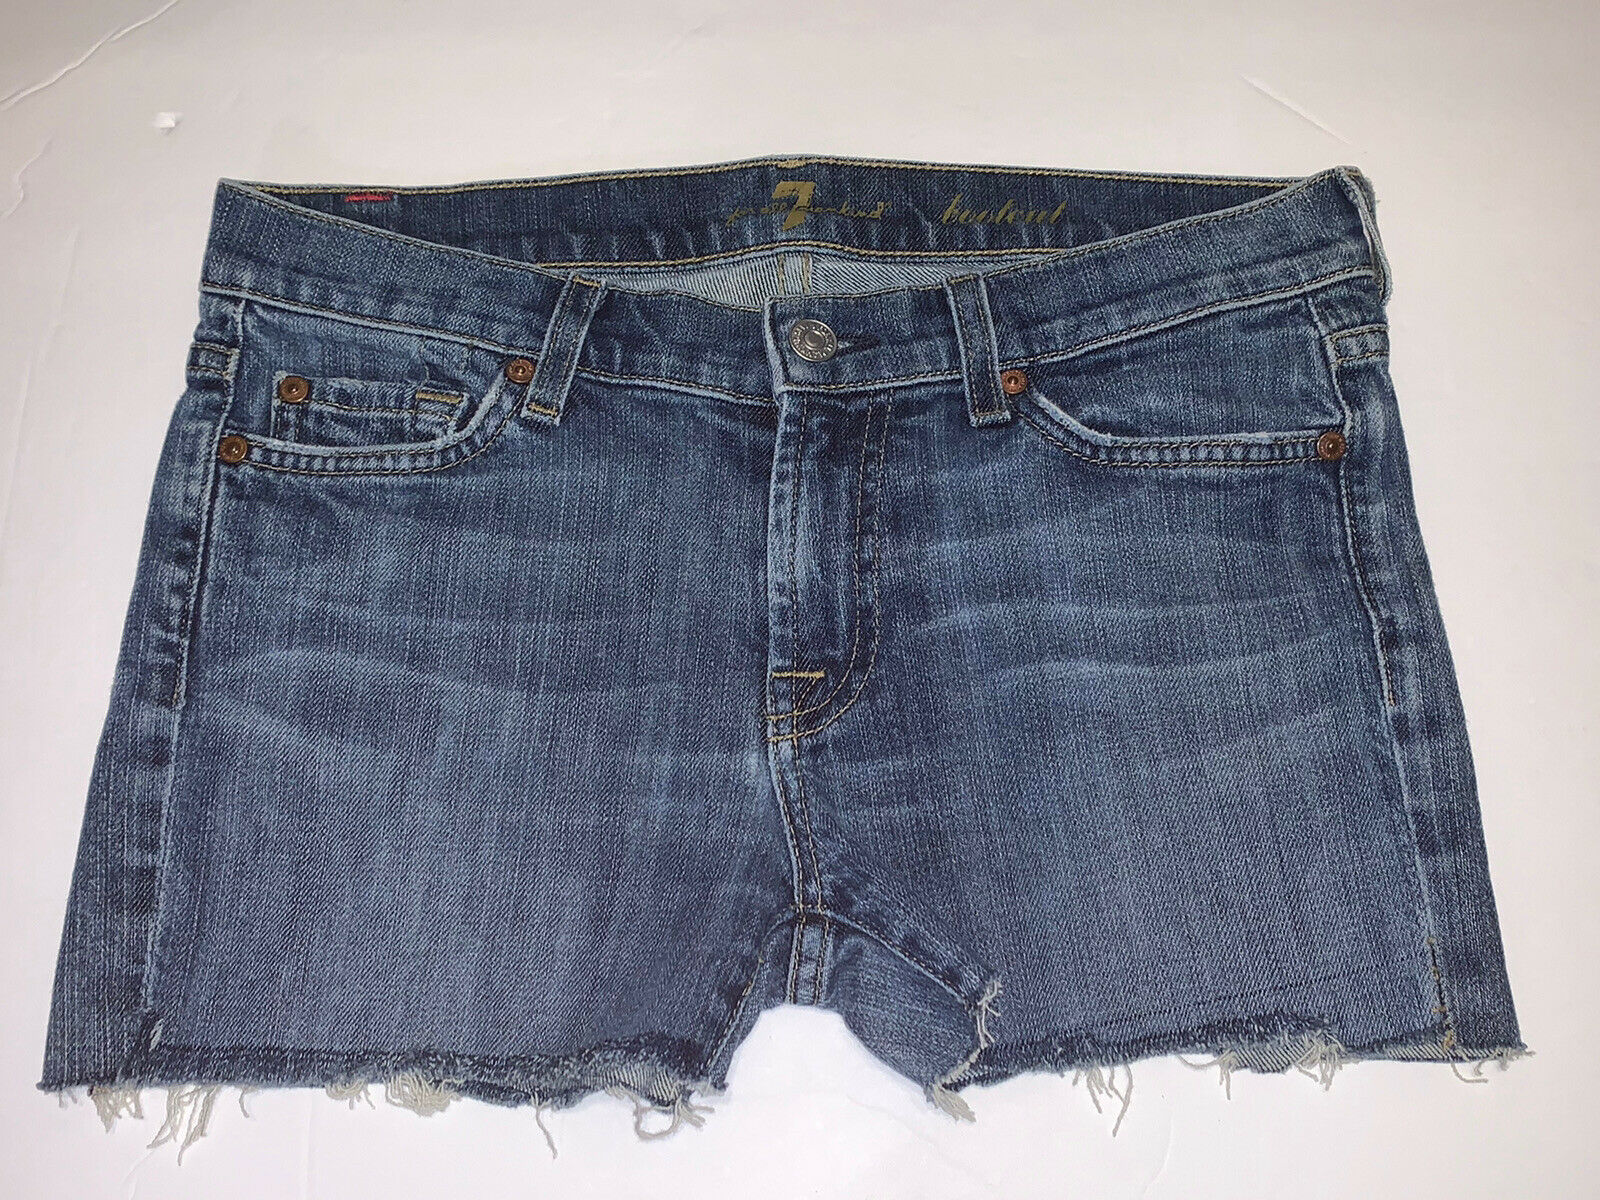 Primary image for 7 For All Mankind - Size 28 - Woman's Shorts